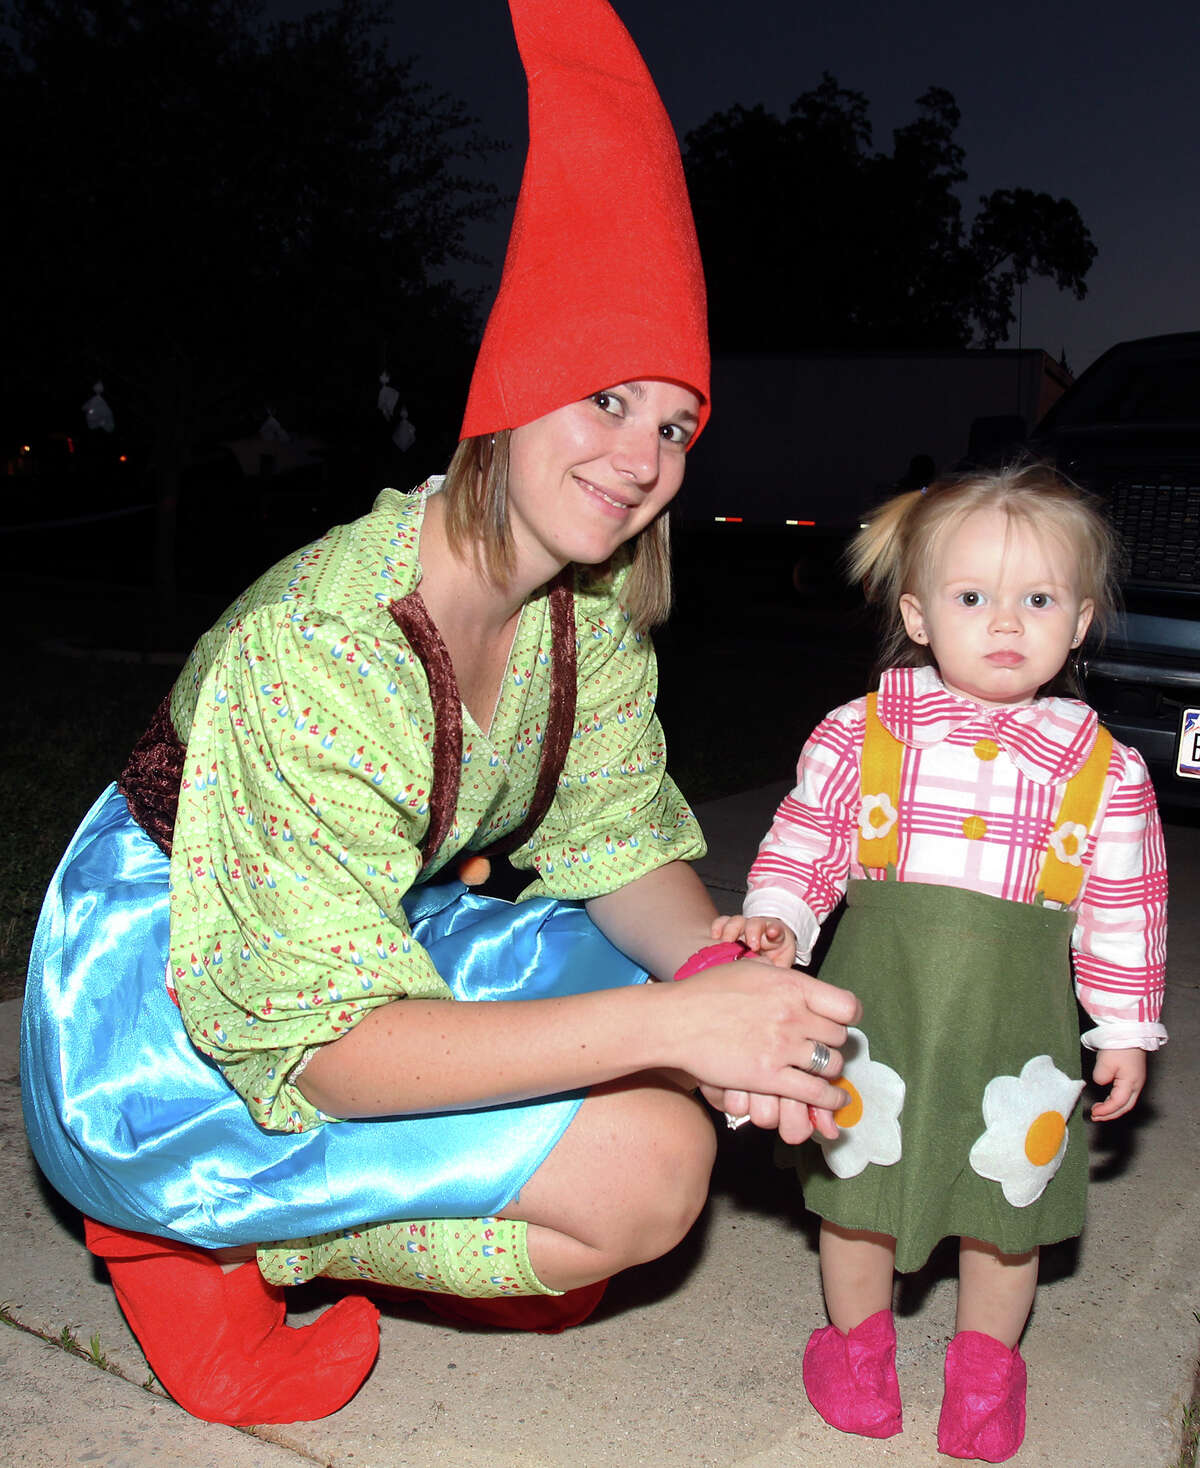 Heather Jurek enjoys the evening with daughter Addison as kids go trick-or-treating on the Southeast Side on October 31, 2013.